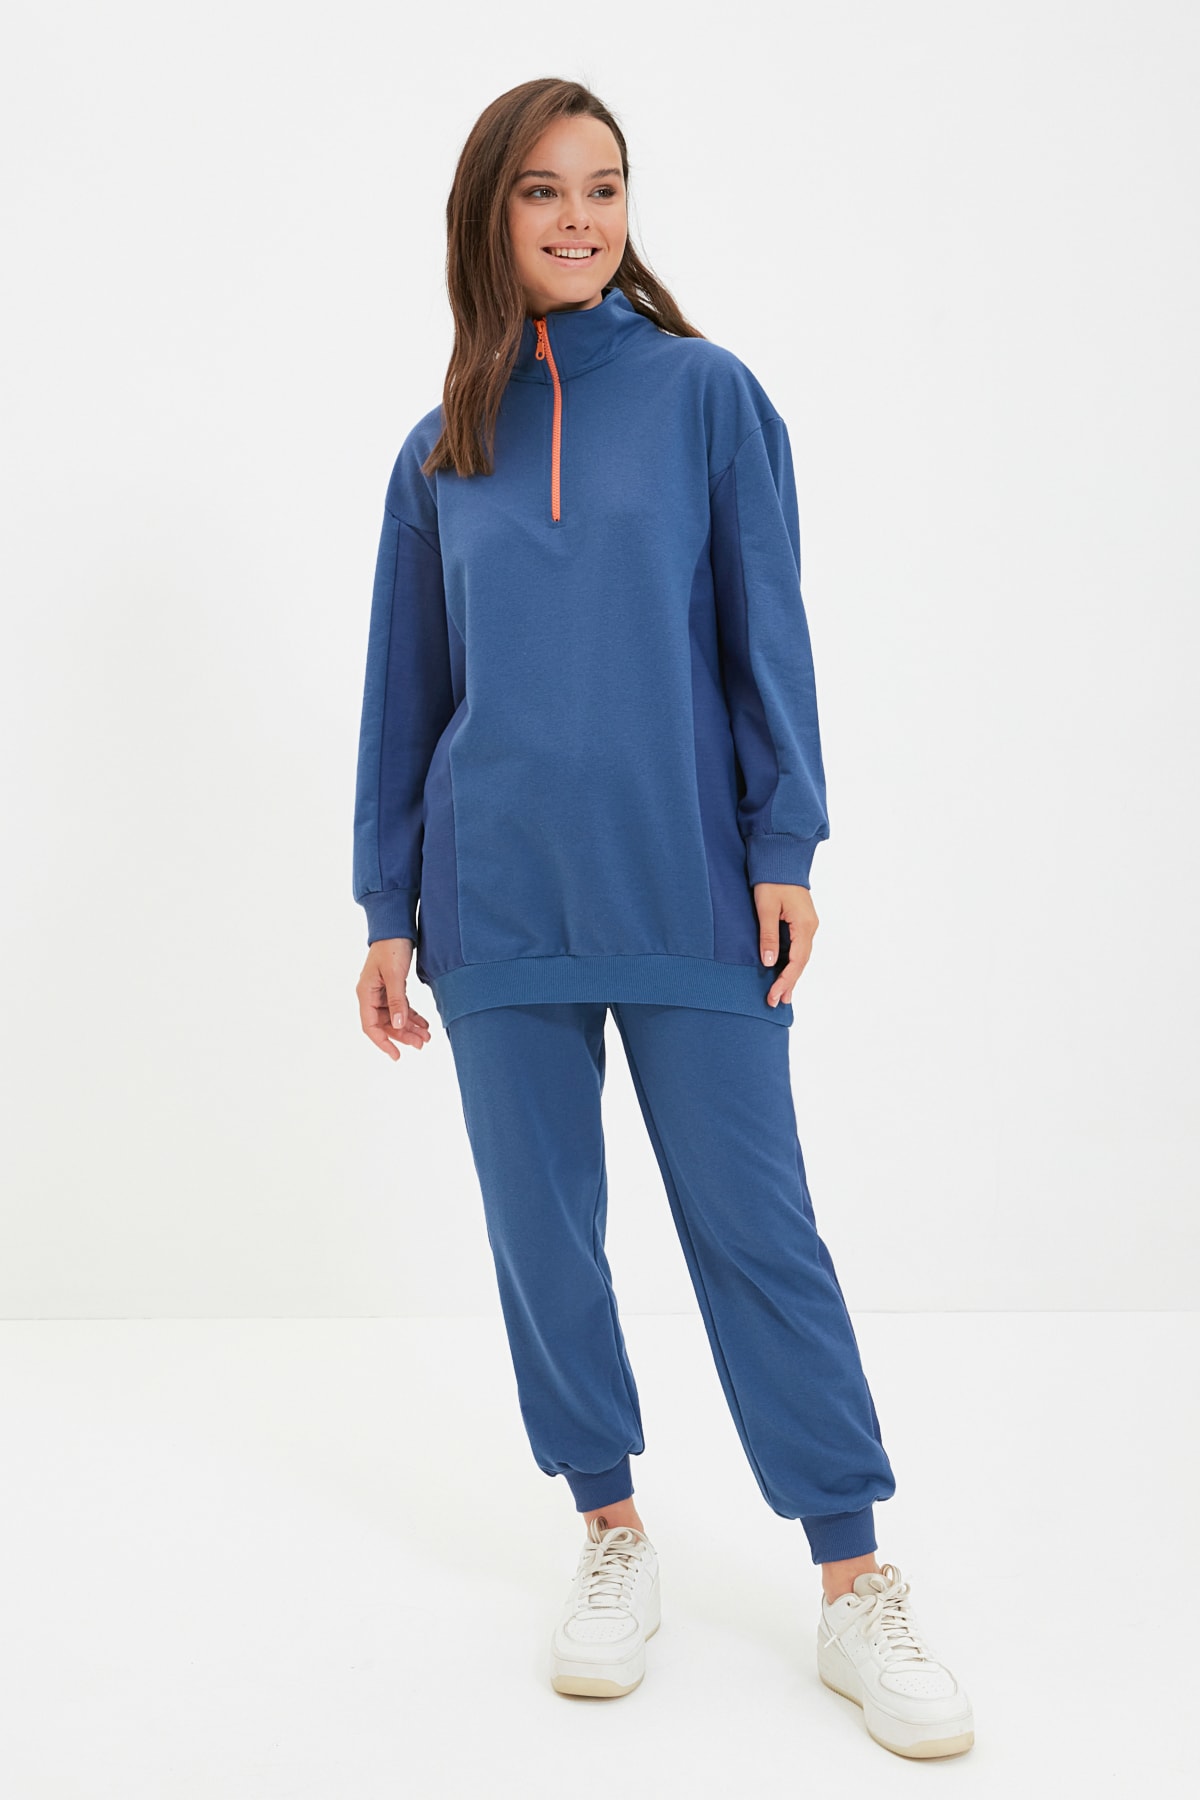 Trendyol Navy Blue Stand-Up Collar Zippered With Color Block, Soft Pile Inside, Thick Knitted Tracksuit Set